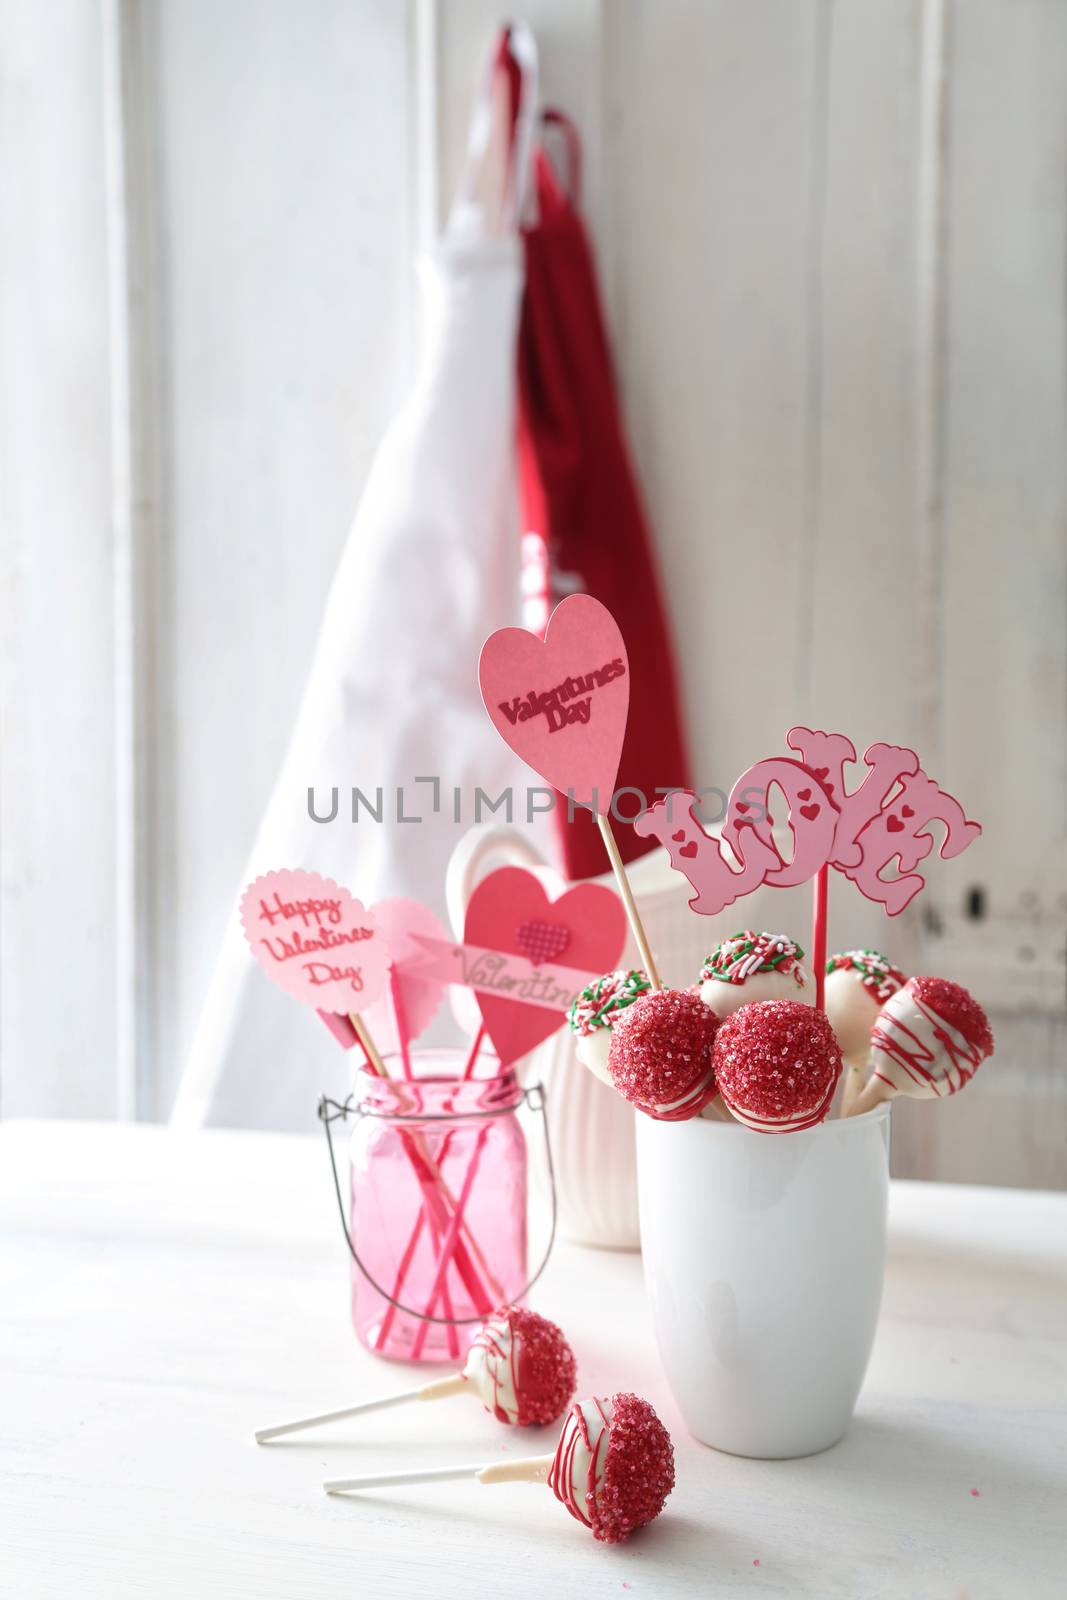 Red and white cake pops with decorations for Valentine's Day by Sandralise